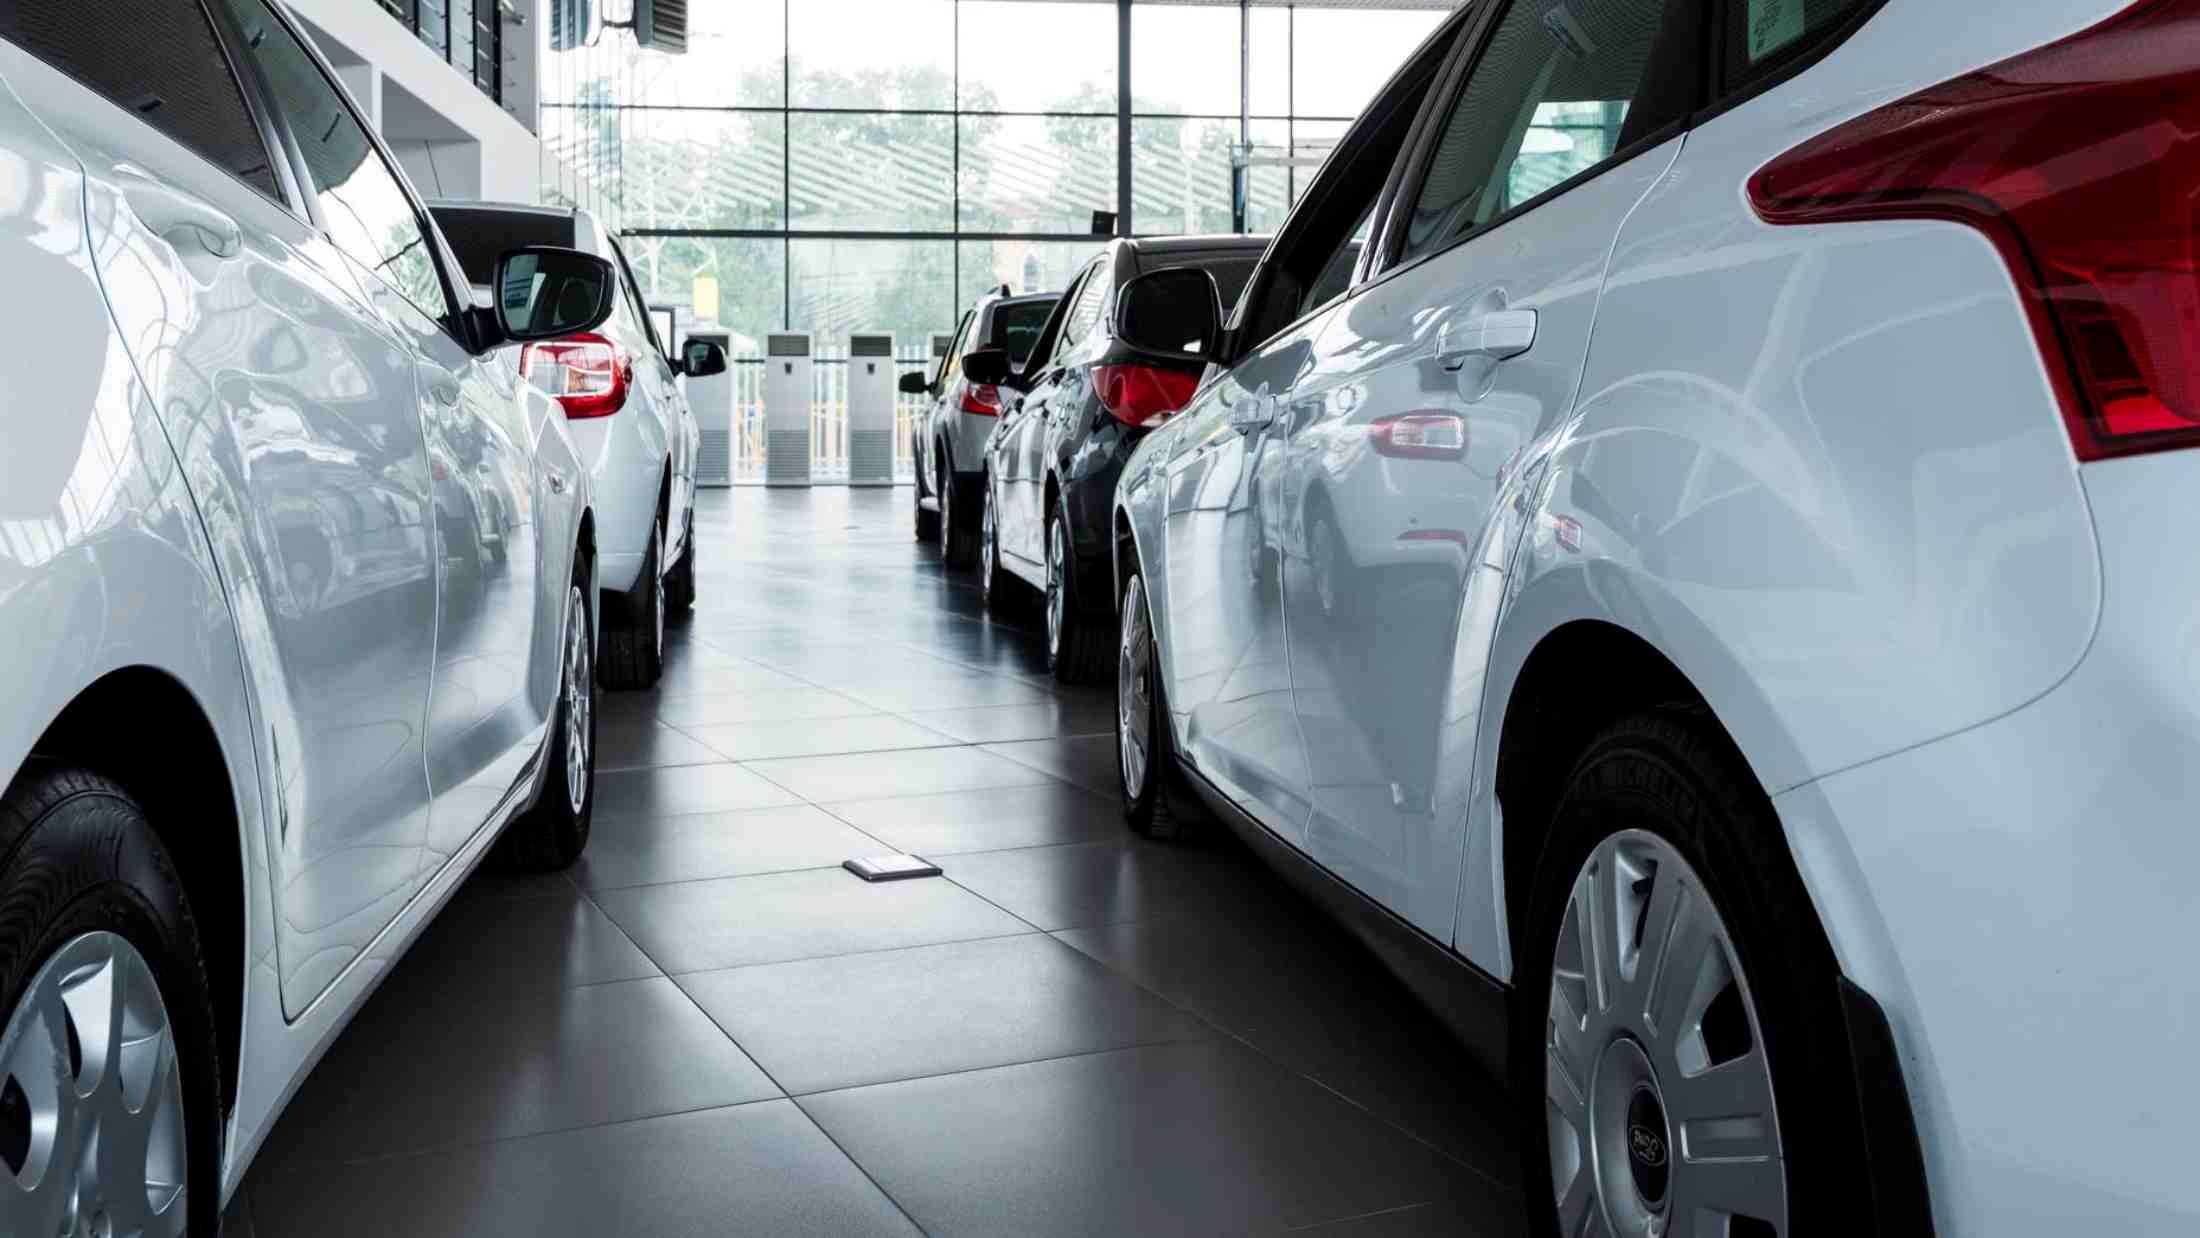 Rear view of white cars in dealership showroom